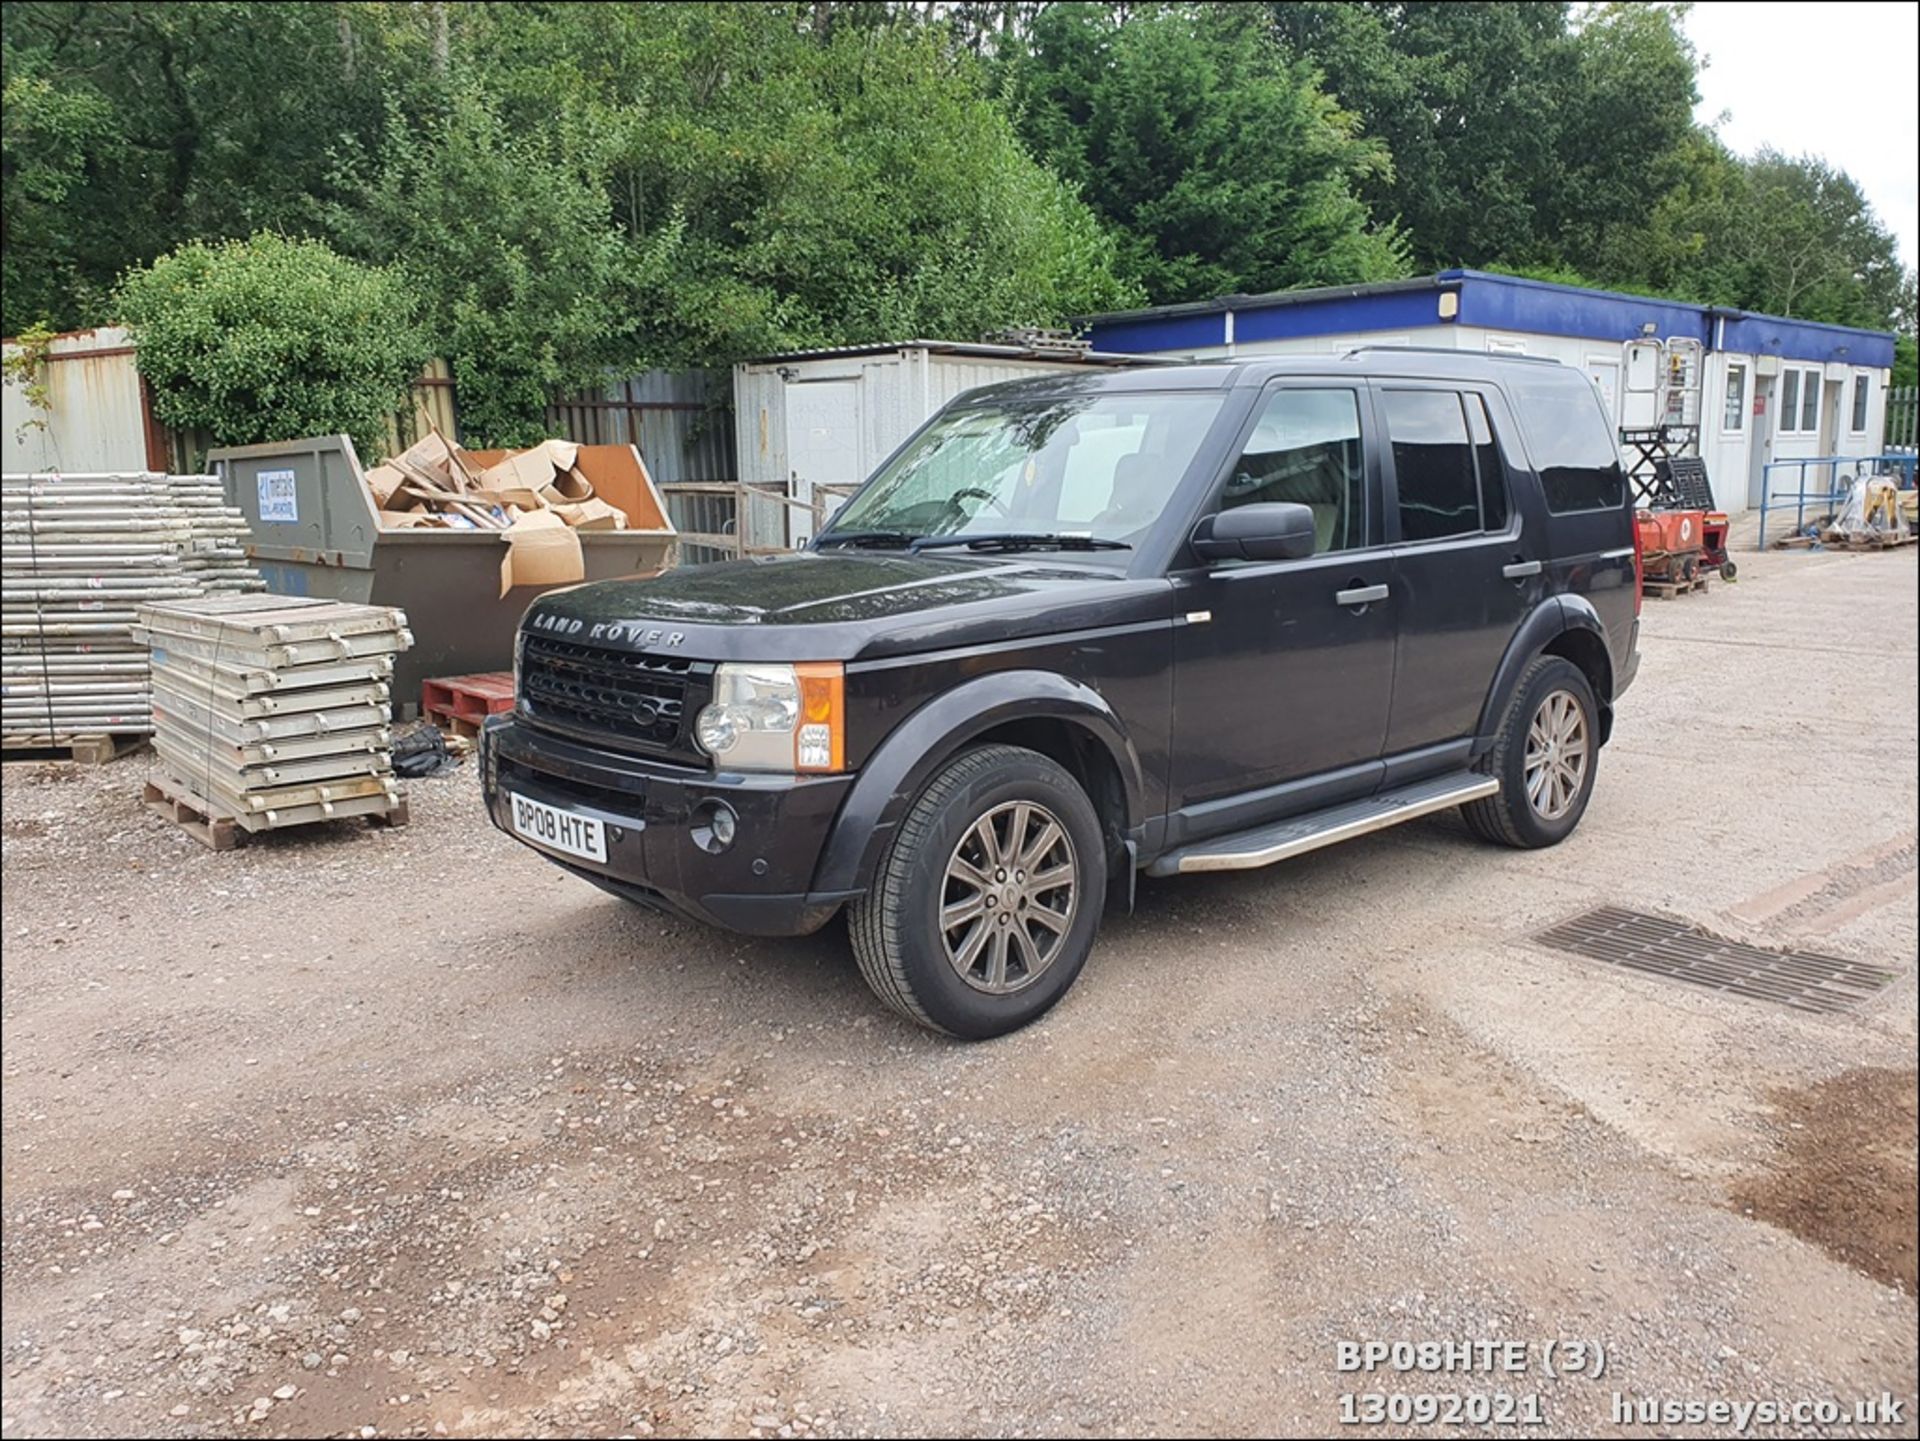 08/08 LAND ROVER DISCOVERY TDV6 SE A - 2720cc 5dr Estate (Brown, 190k) - Image 3 of 18